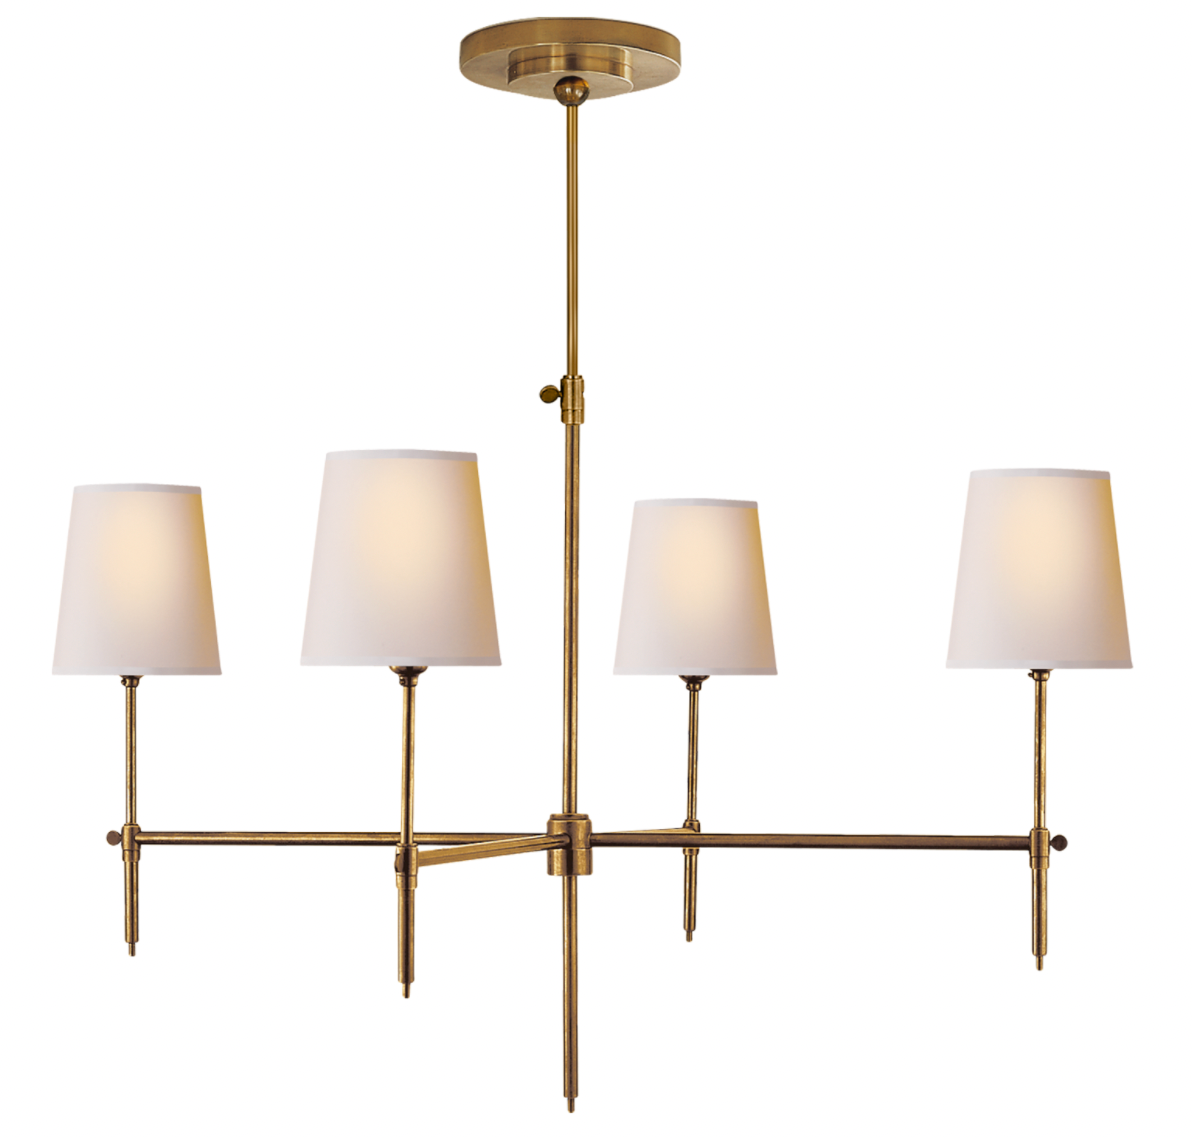 Bryant Large Chandelier in Hand-Rubbed Antique Brass with Natural Paper Shades (6695623884902)